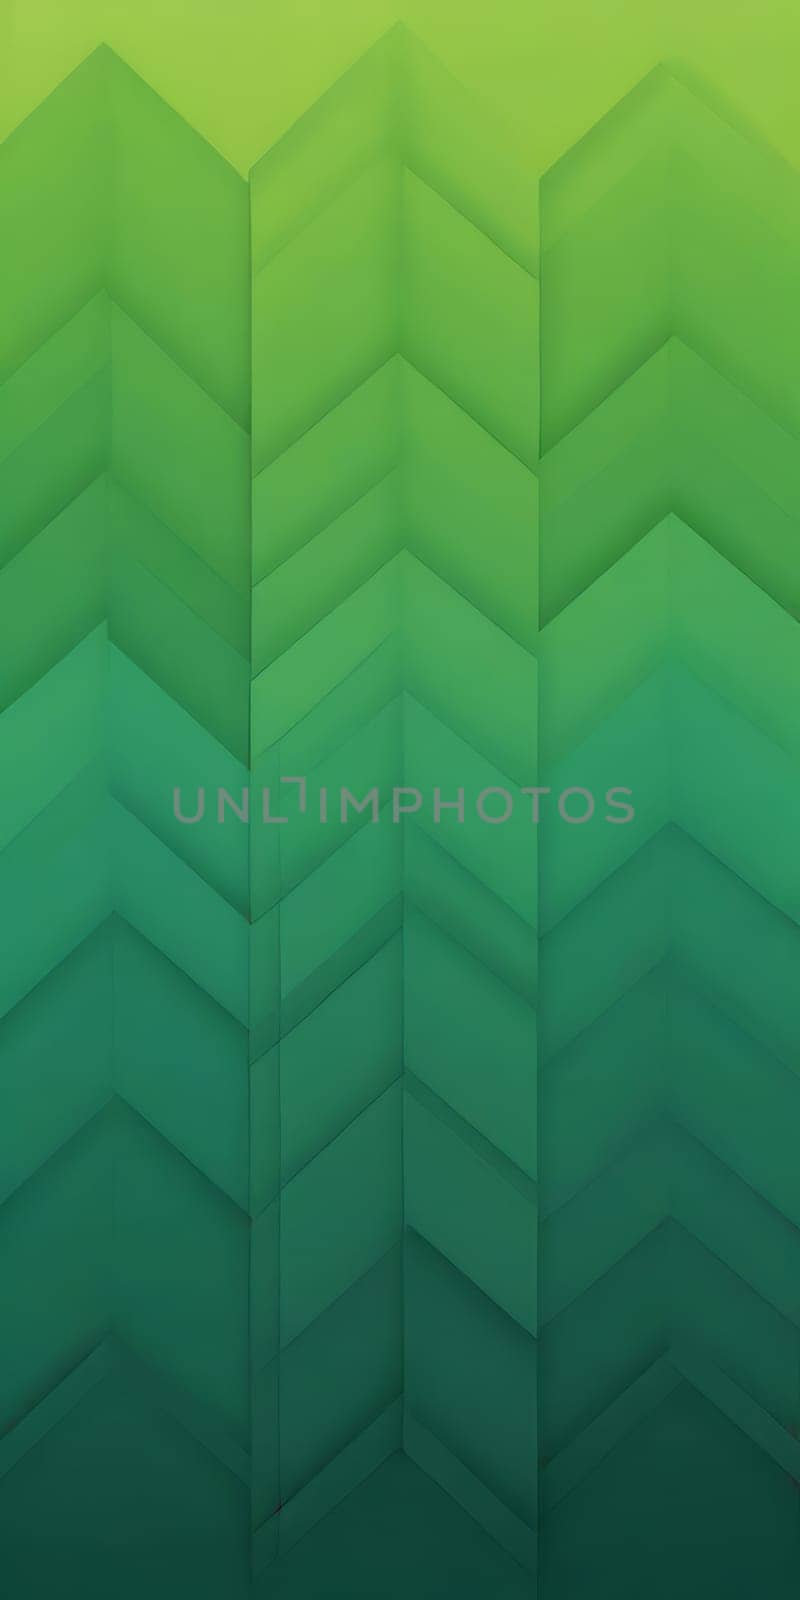 Serrated Shapes in Green Dimgrey by nkotlyar